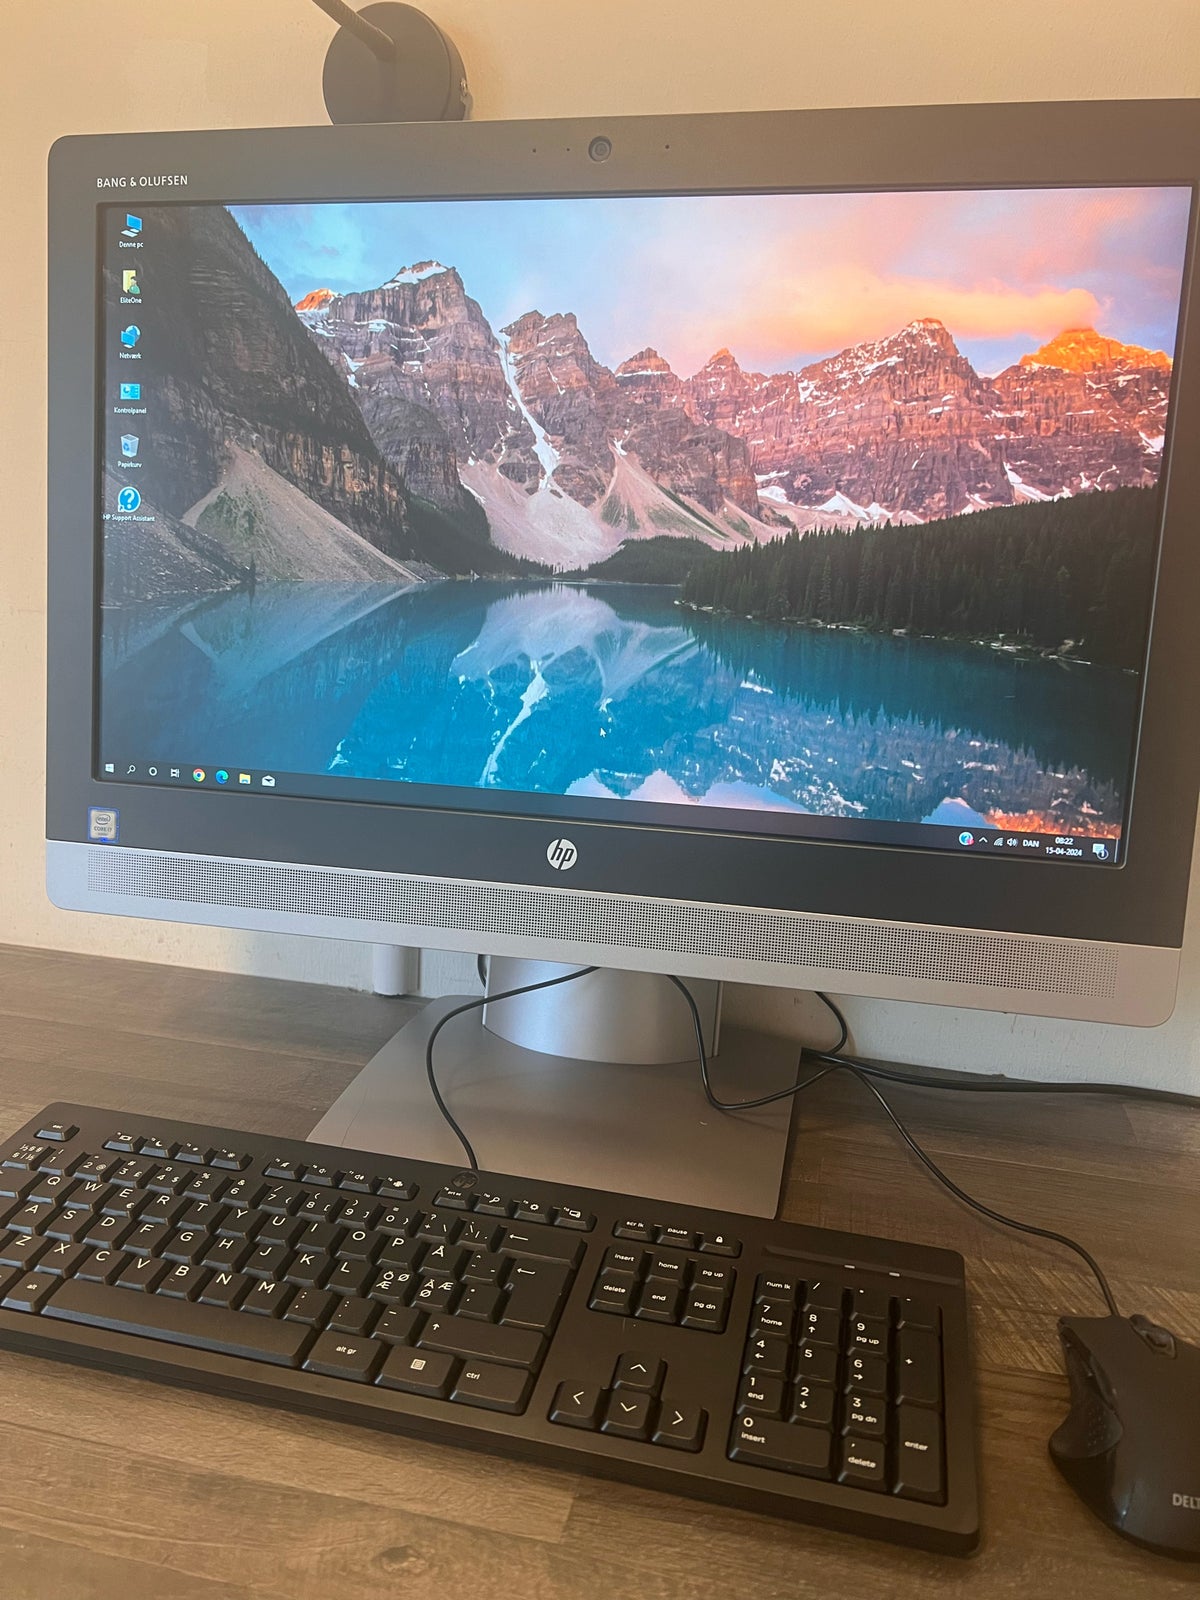 HP, 24” HP ELITE1 B&O EDITION ALL-IN-ONE PC, God